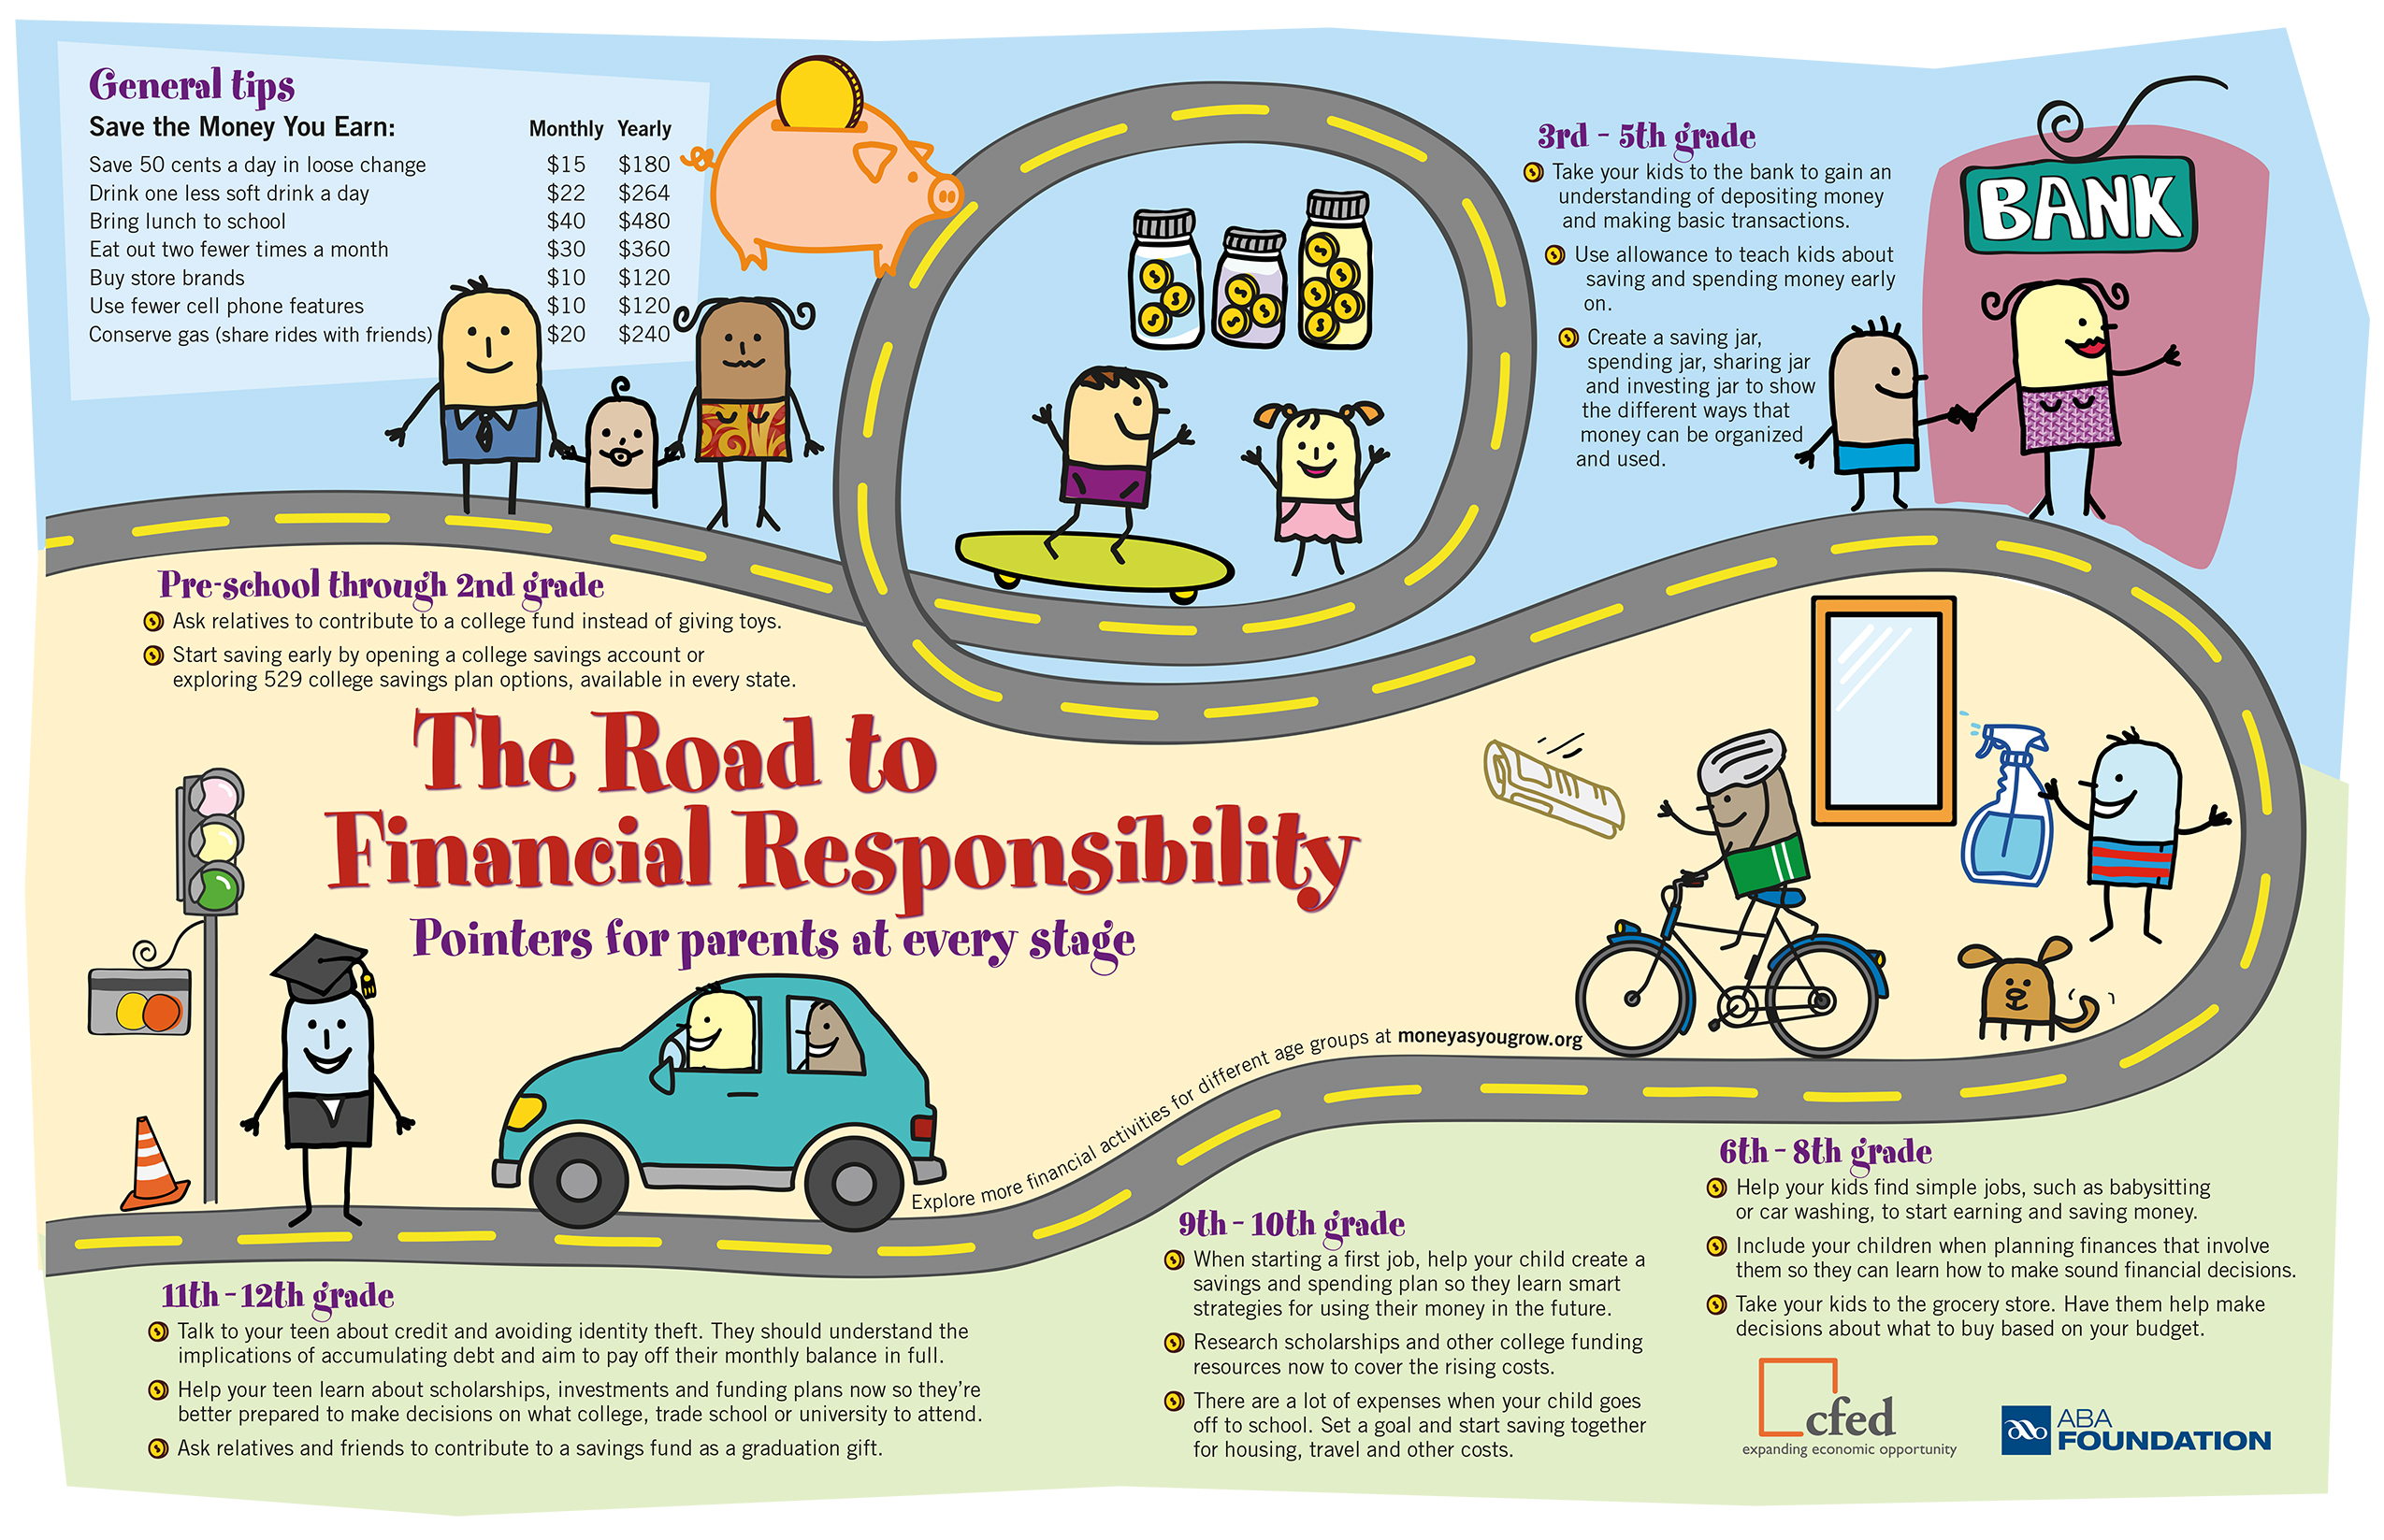 The Road to Financial Responsibility for Kids